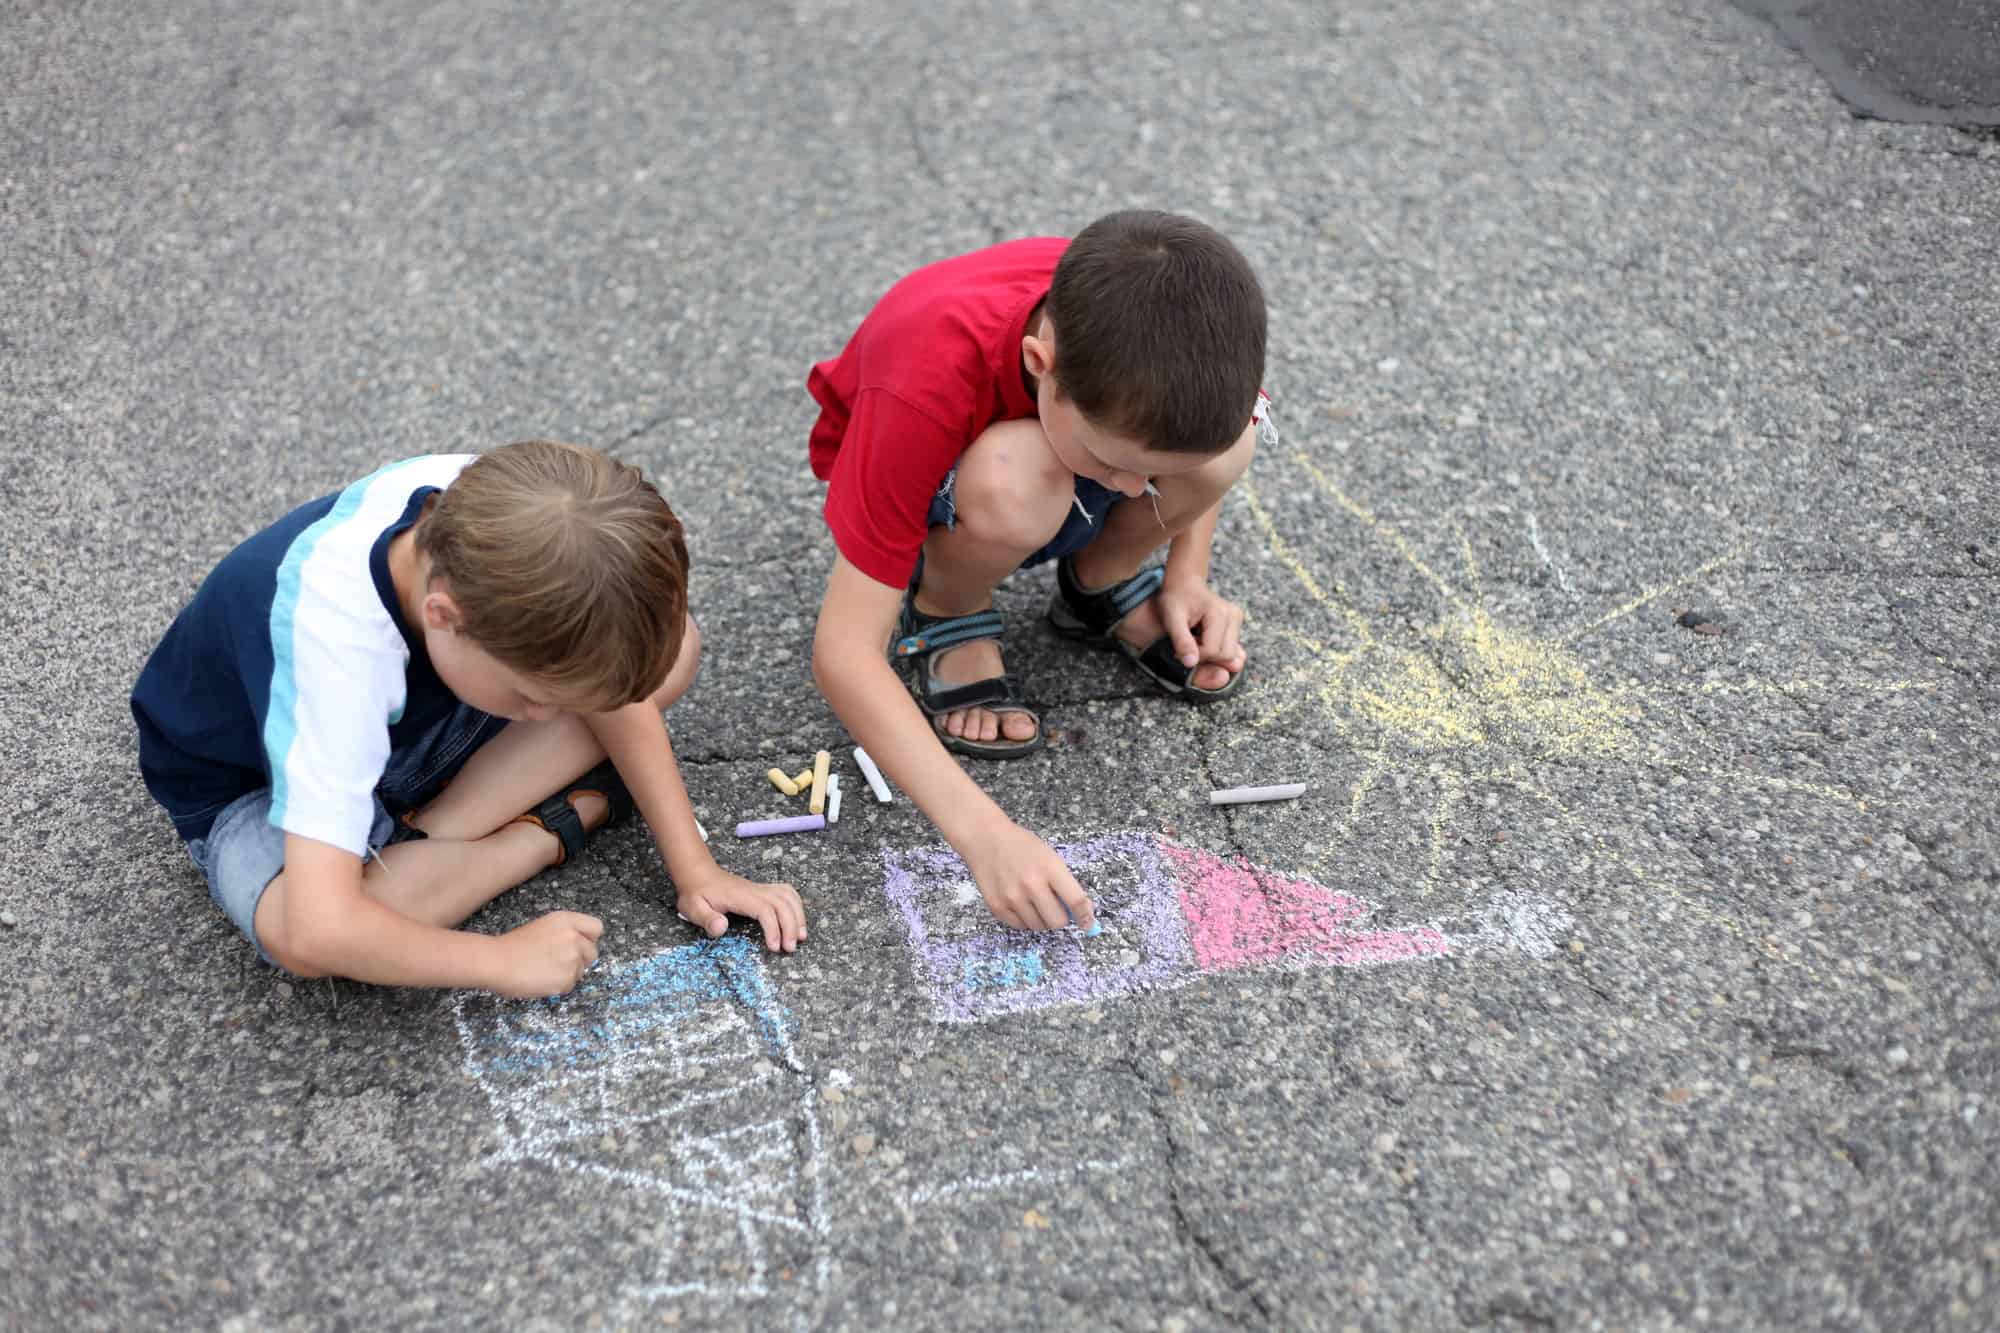 Siblings creating a sidewalk chalk masterpiece together. Discover 4 simple strategies to end sibling rivalry for good. And for more parenting tips and family inspiration, follow Made In A Pinch on Pinterest!